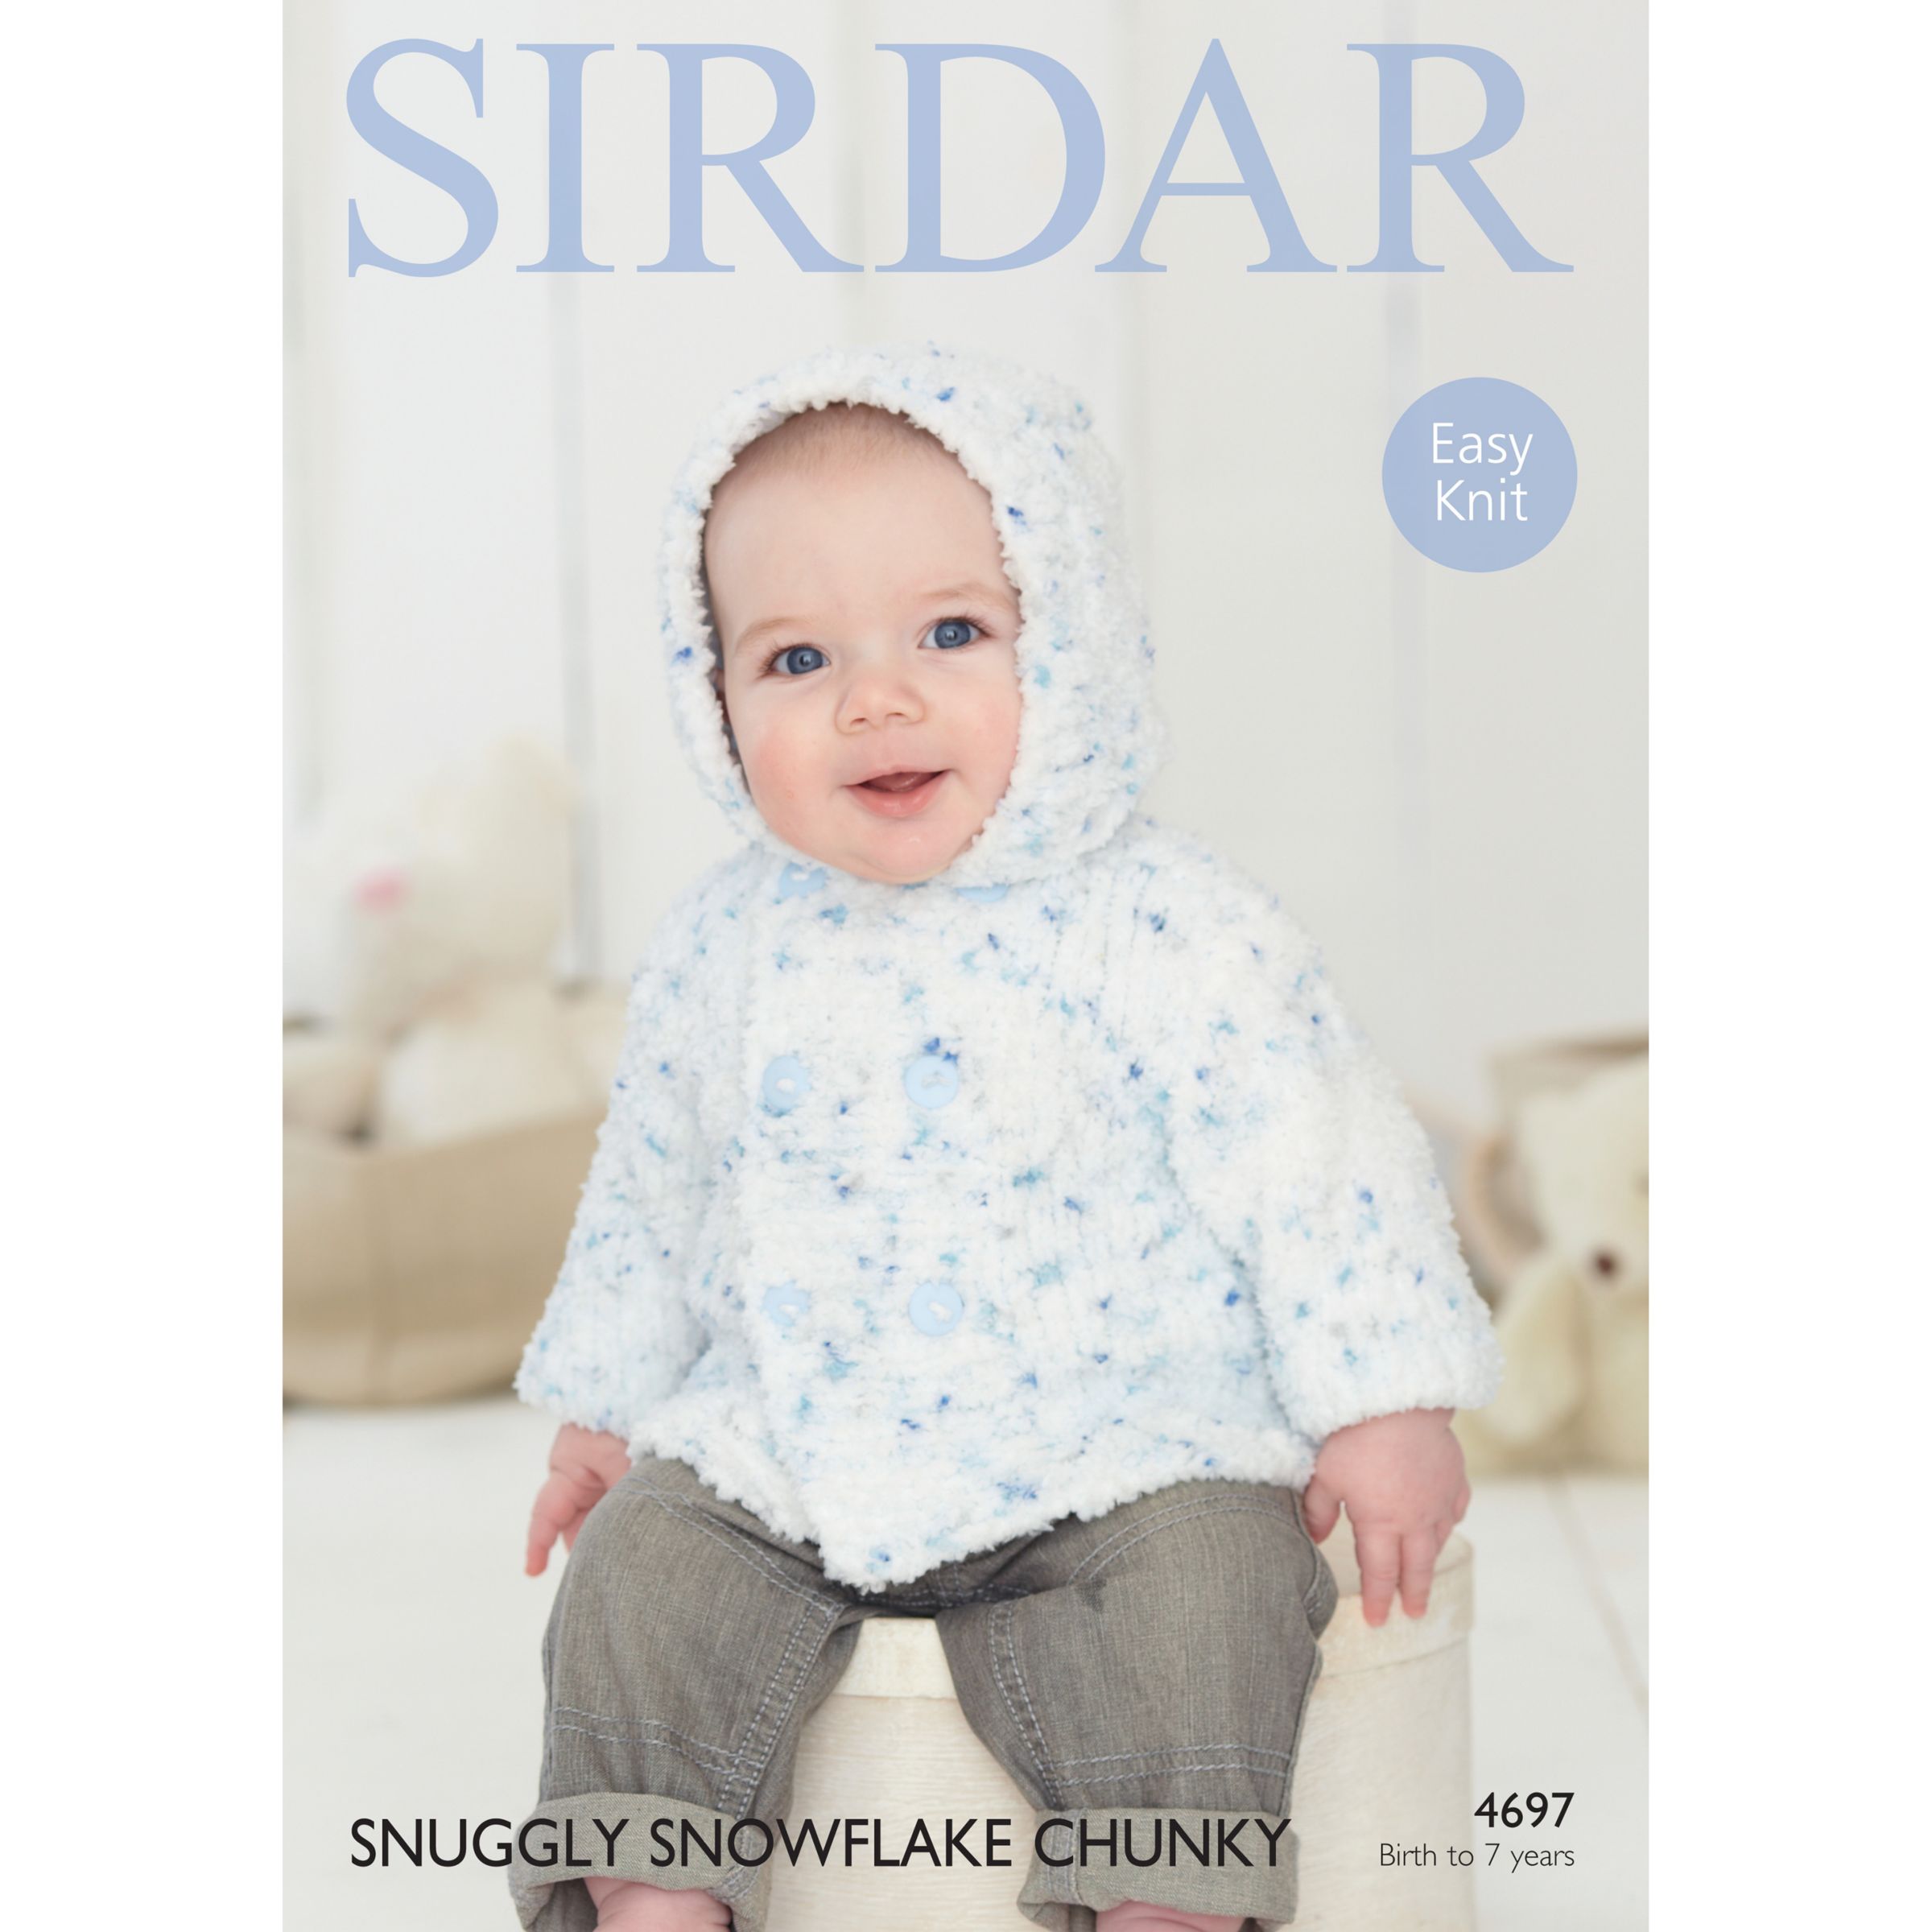 Sirdar Snuggly Snowflake Chunky Baby Cardigan Knitting Paper